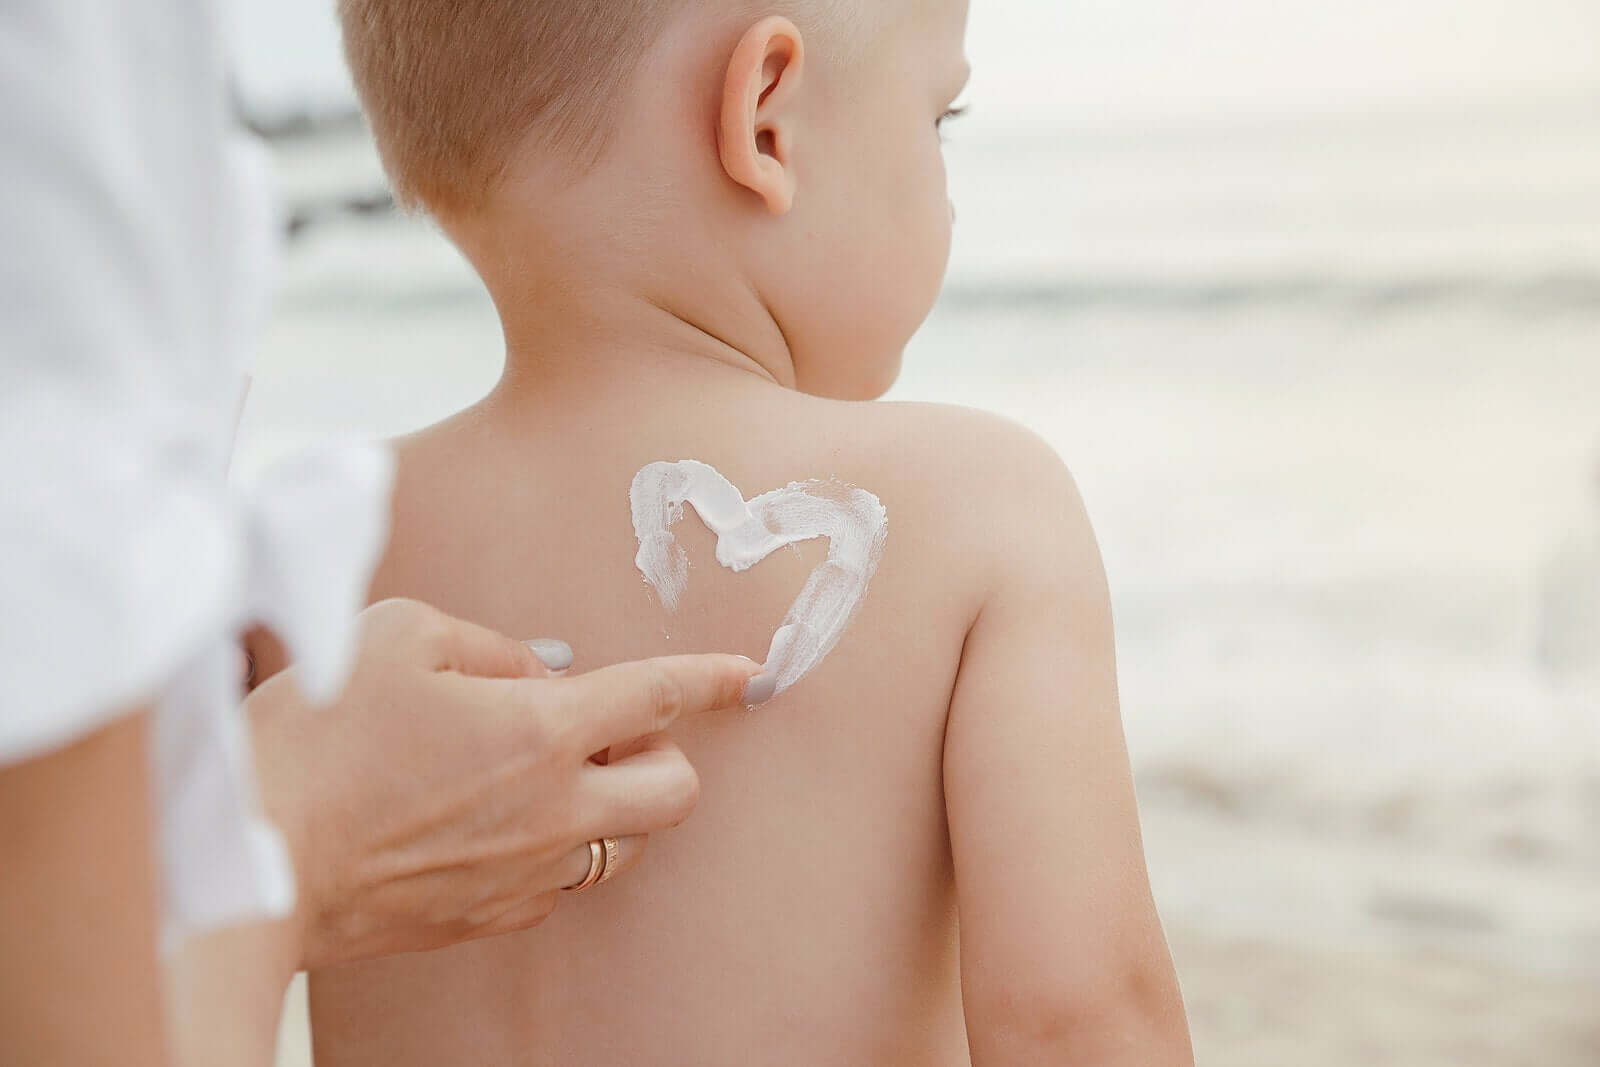 A mother putting sunscreen on her toddler son at the beach.